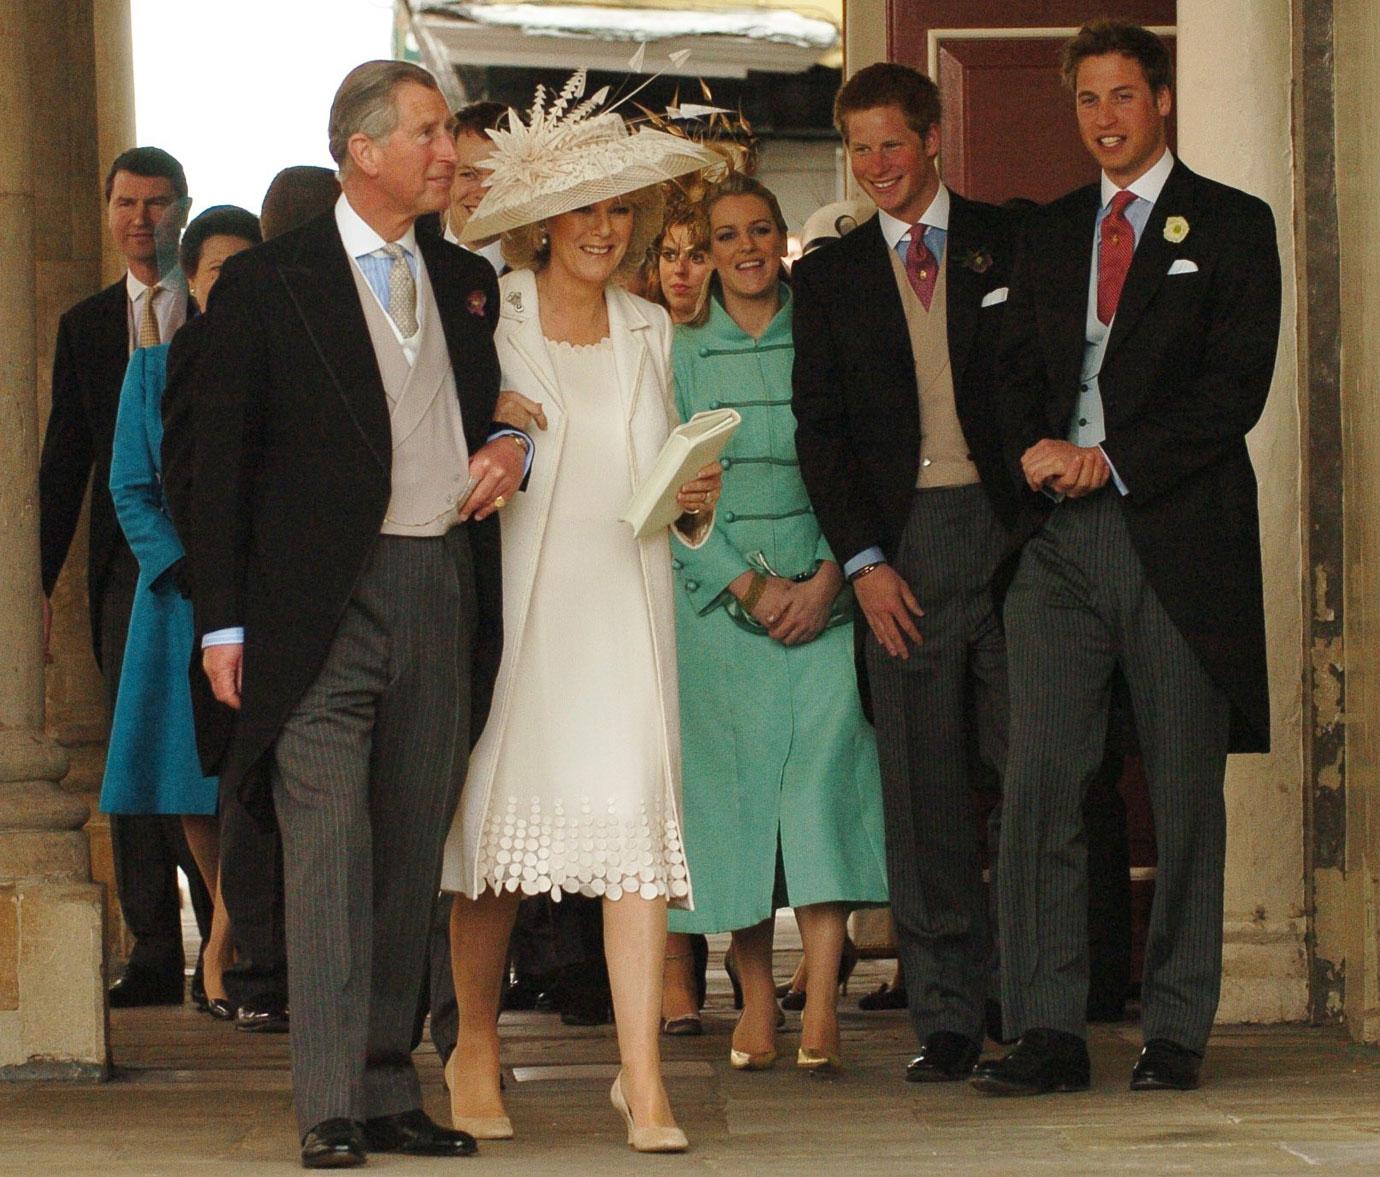 Camilla's Wedding To Prince Charles: A Dream Or A 'Living Nightmare'?